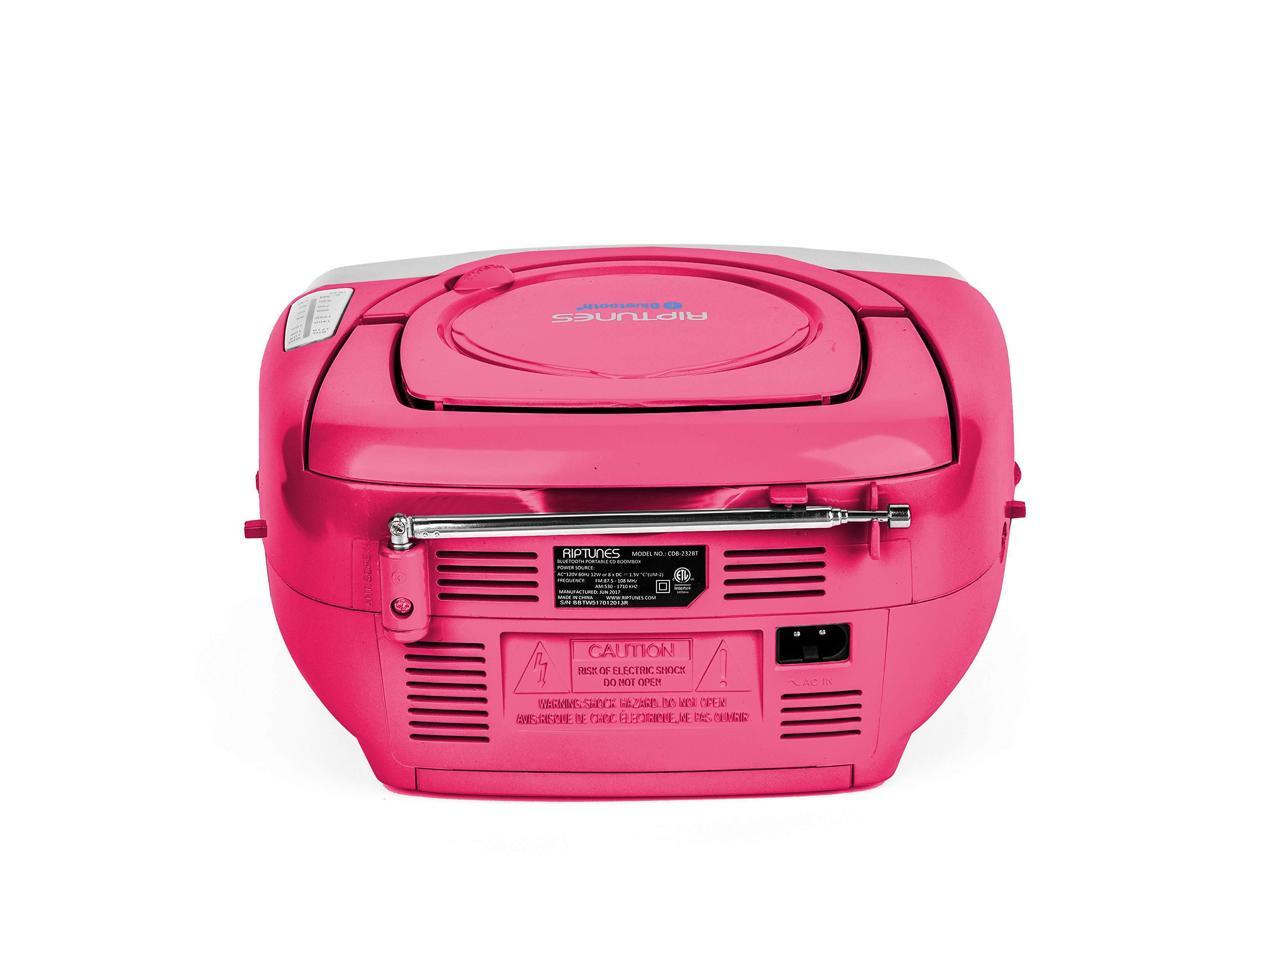 AM/FM Radio Riptunes Programmable CD Boombox Portable Boombox with Bluetooth Silver CDB232BT